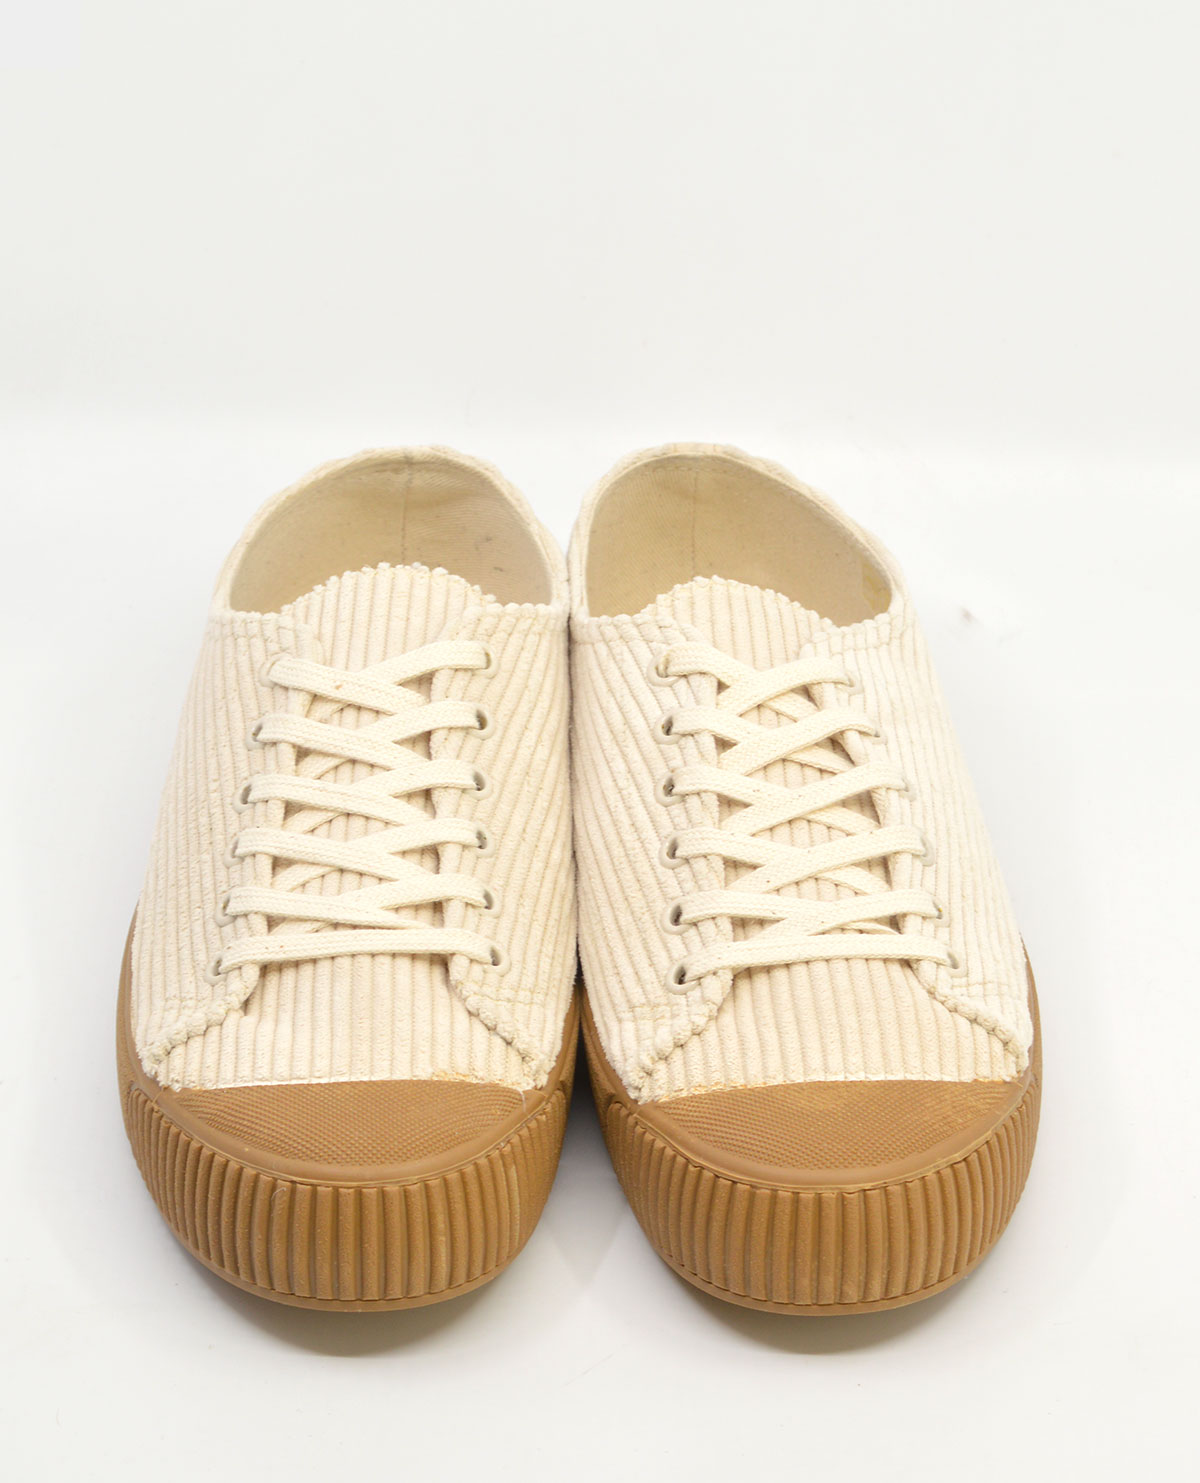 The “Mateo” Shoe In Cream Cord – Mod Shoes